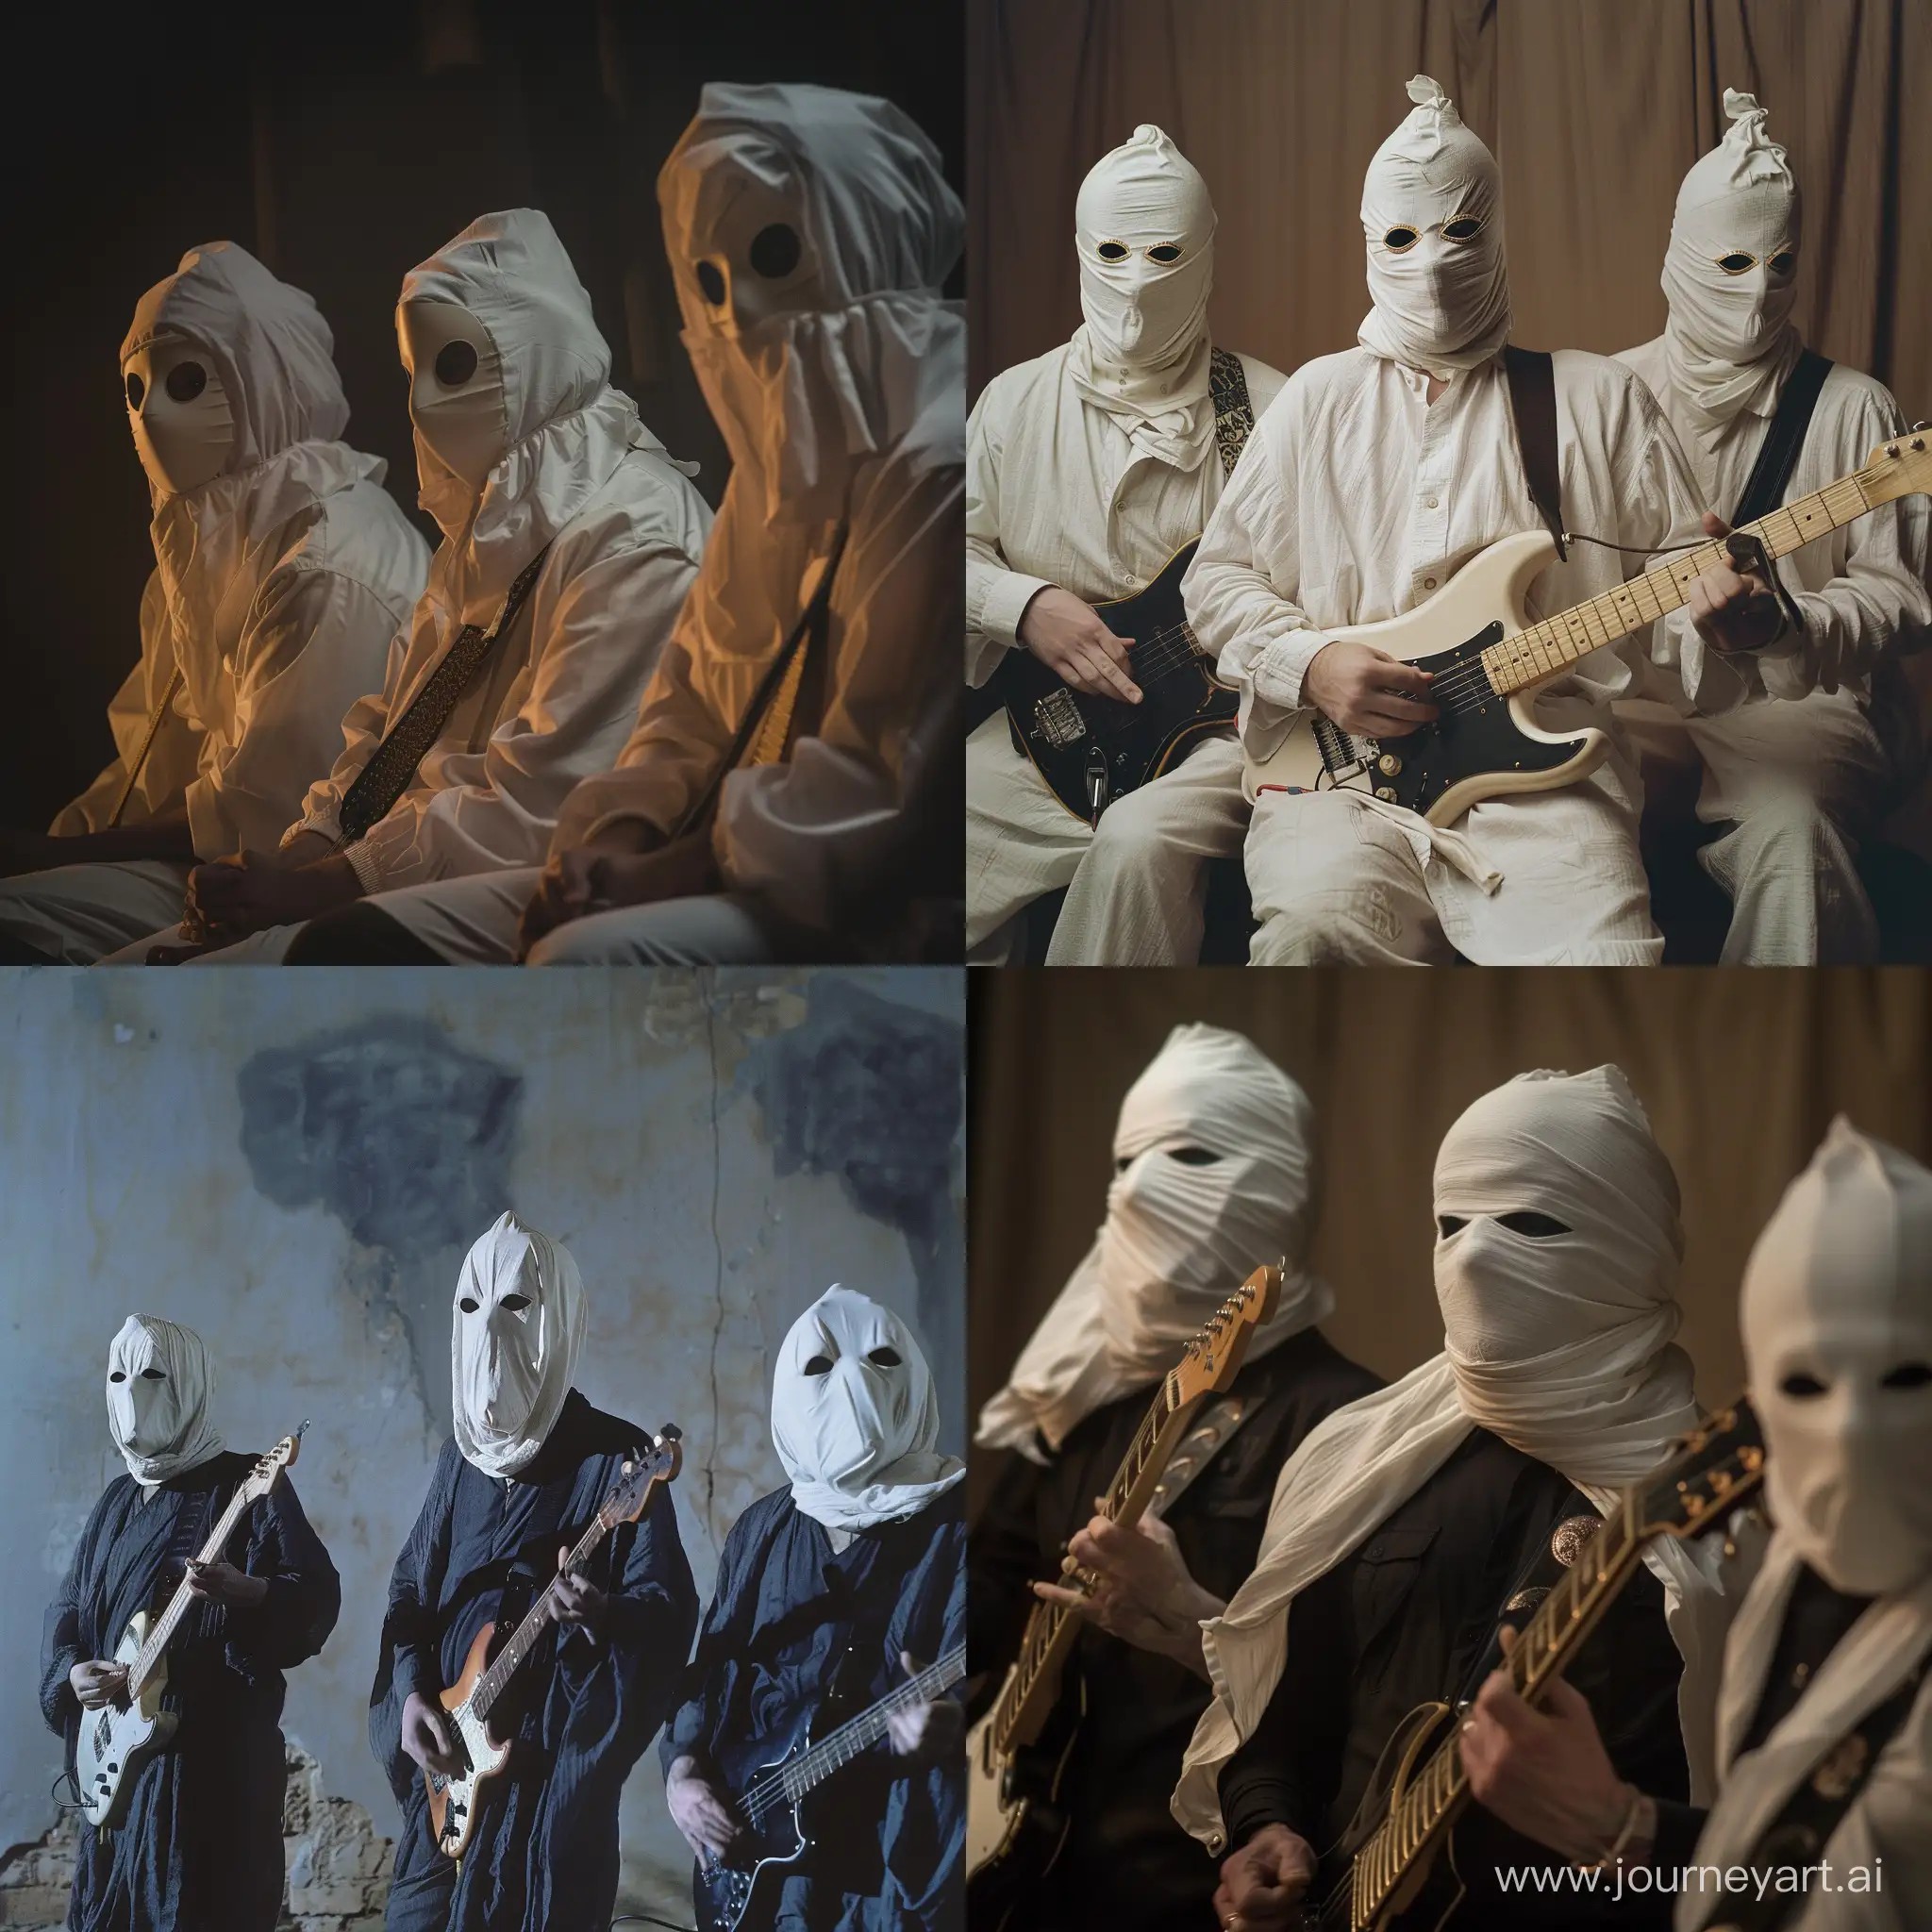 Eccentric-Rock-Concert-with-Masked-Band